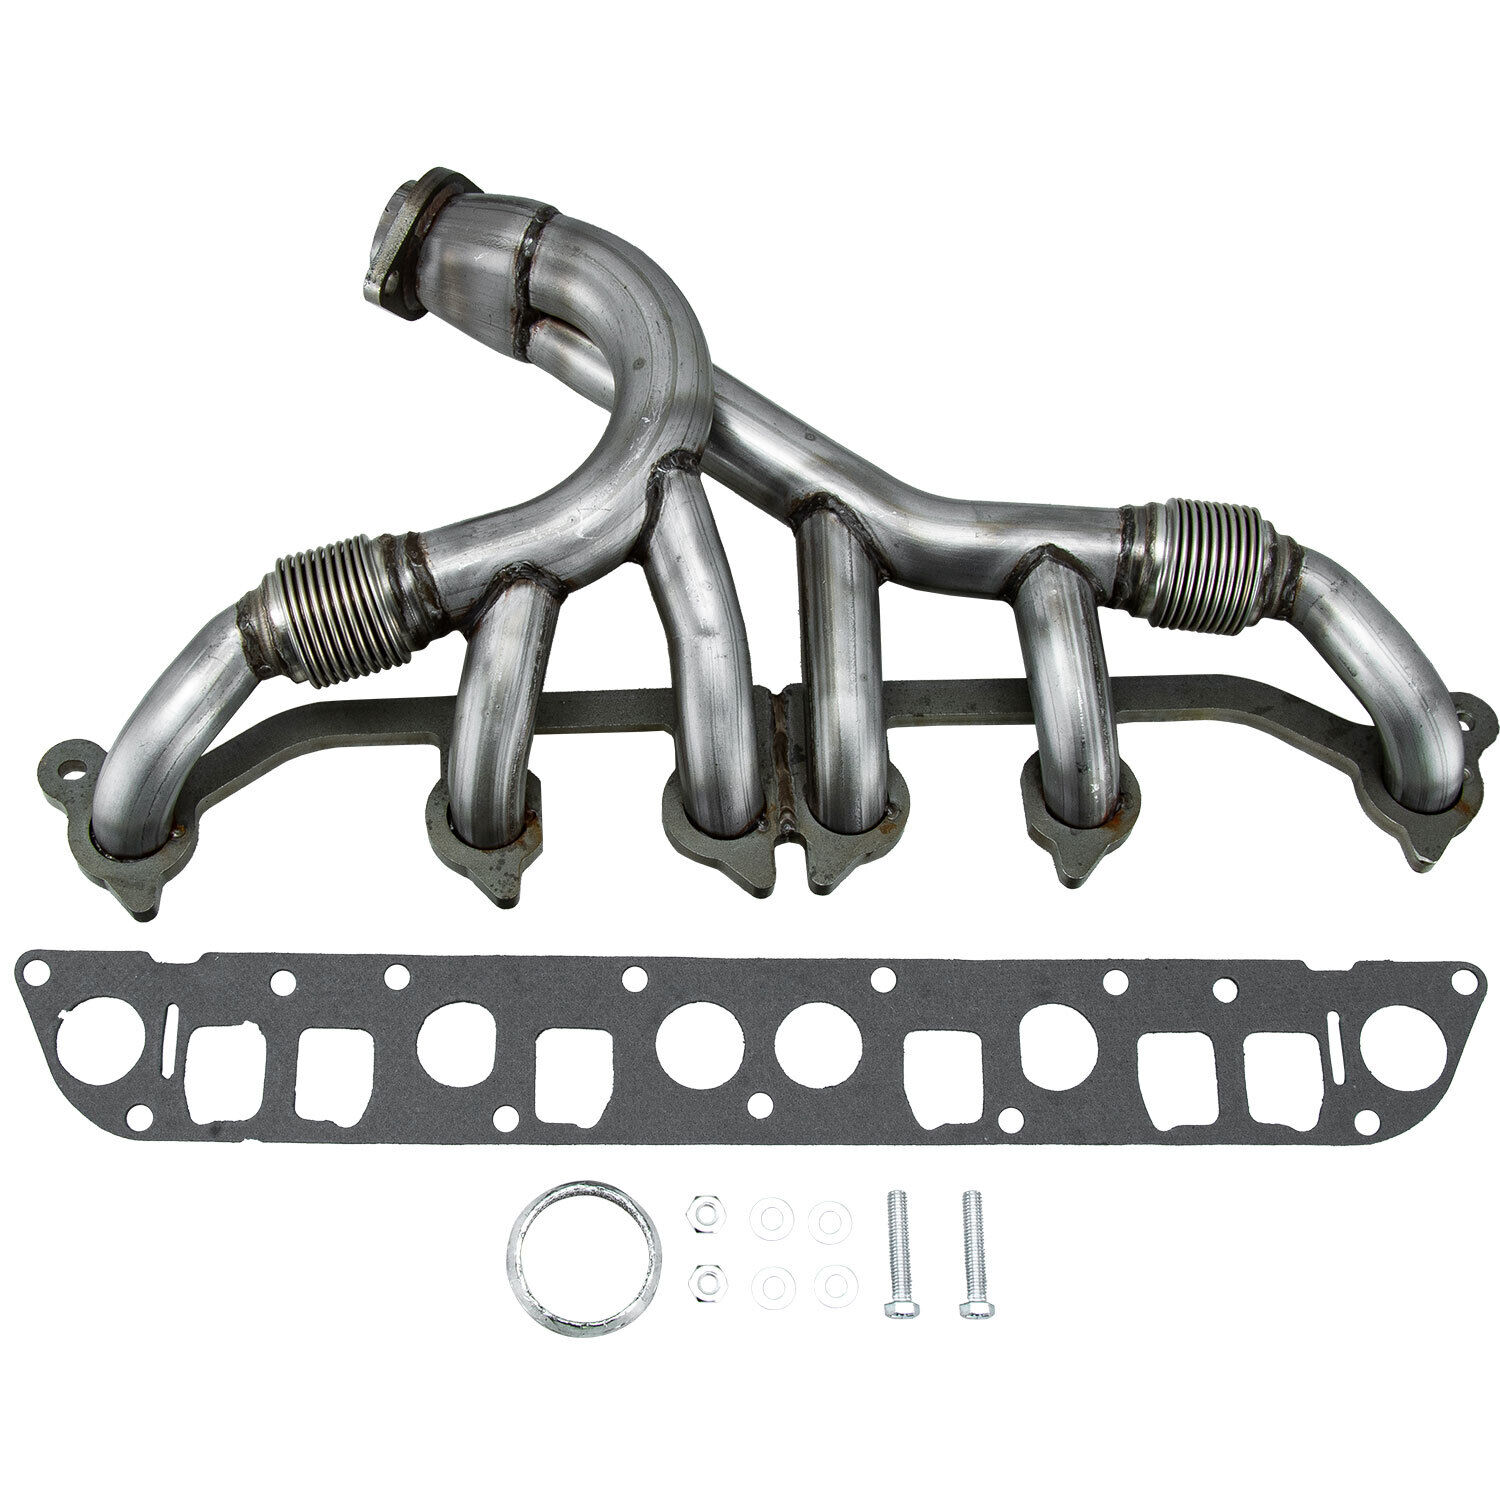 Stainless Steel Exhaust Manifold Fits 91-99 Jeep Grand Cherokee Wrangler 4.0L V6